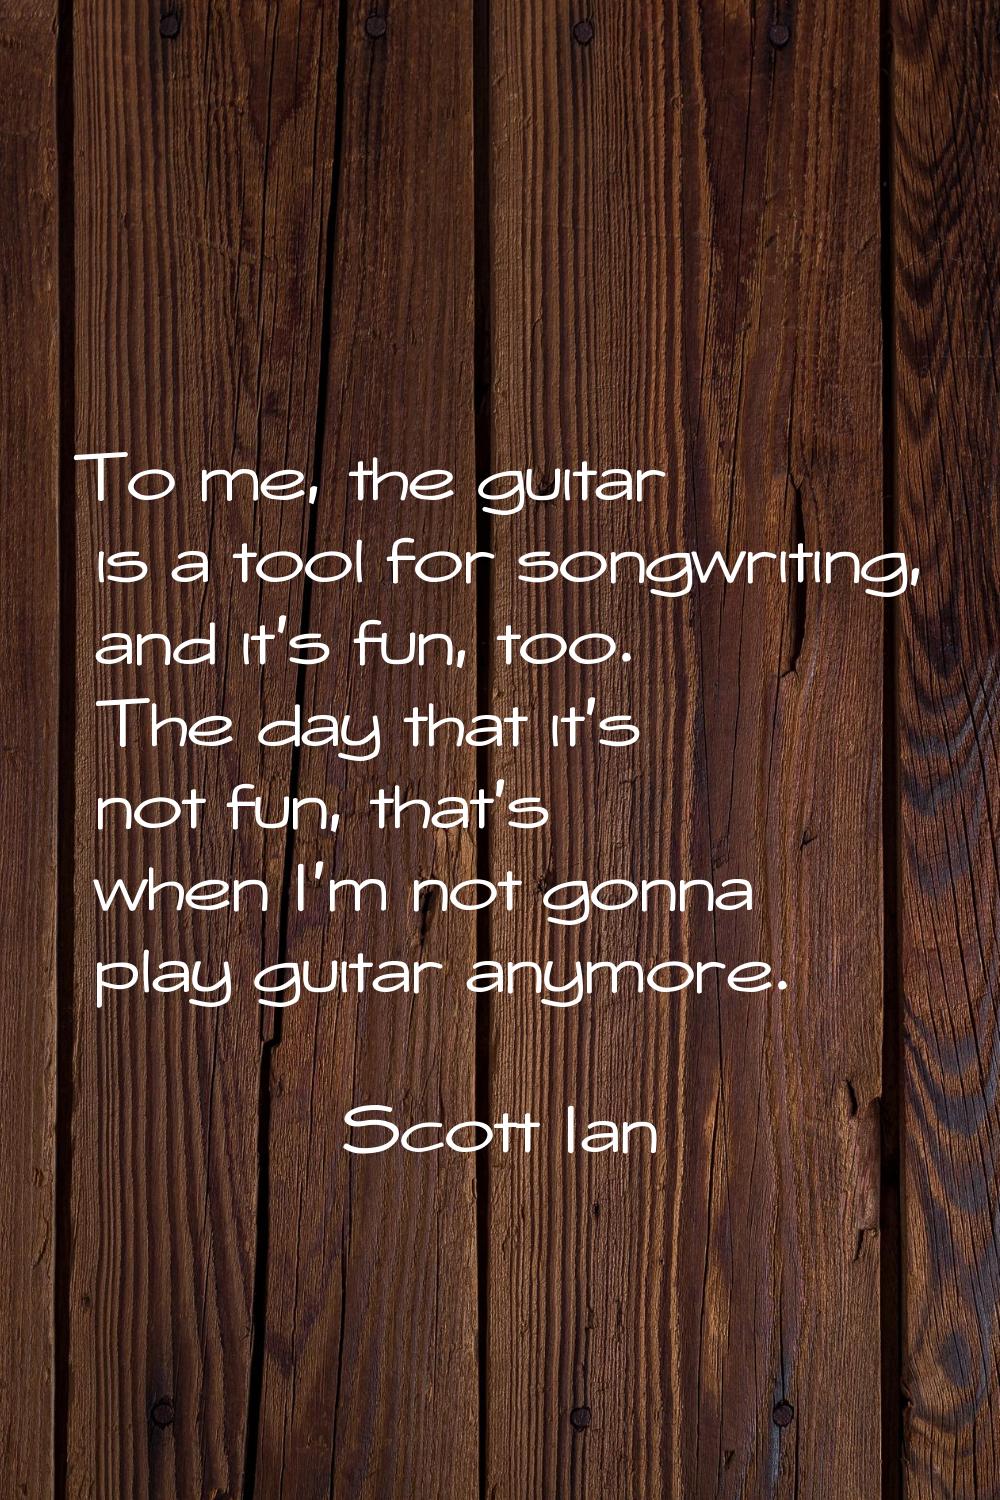 To me, the guitar is a tool for songwriting, and it's fun, too. The day that it's not fun, that's w